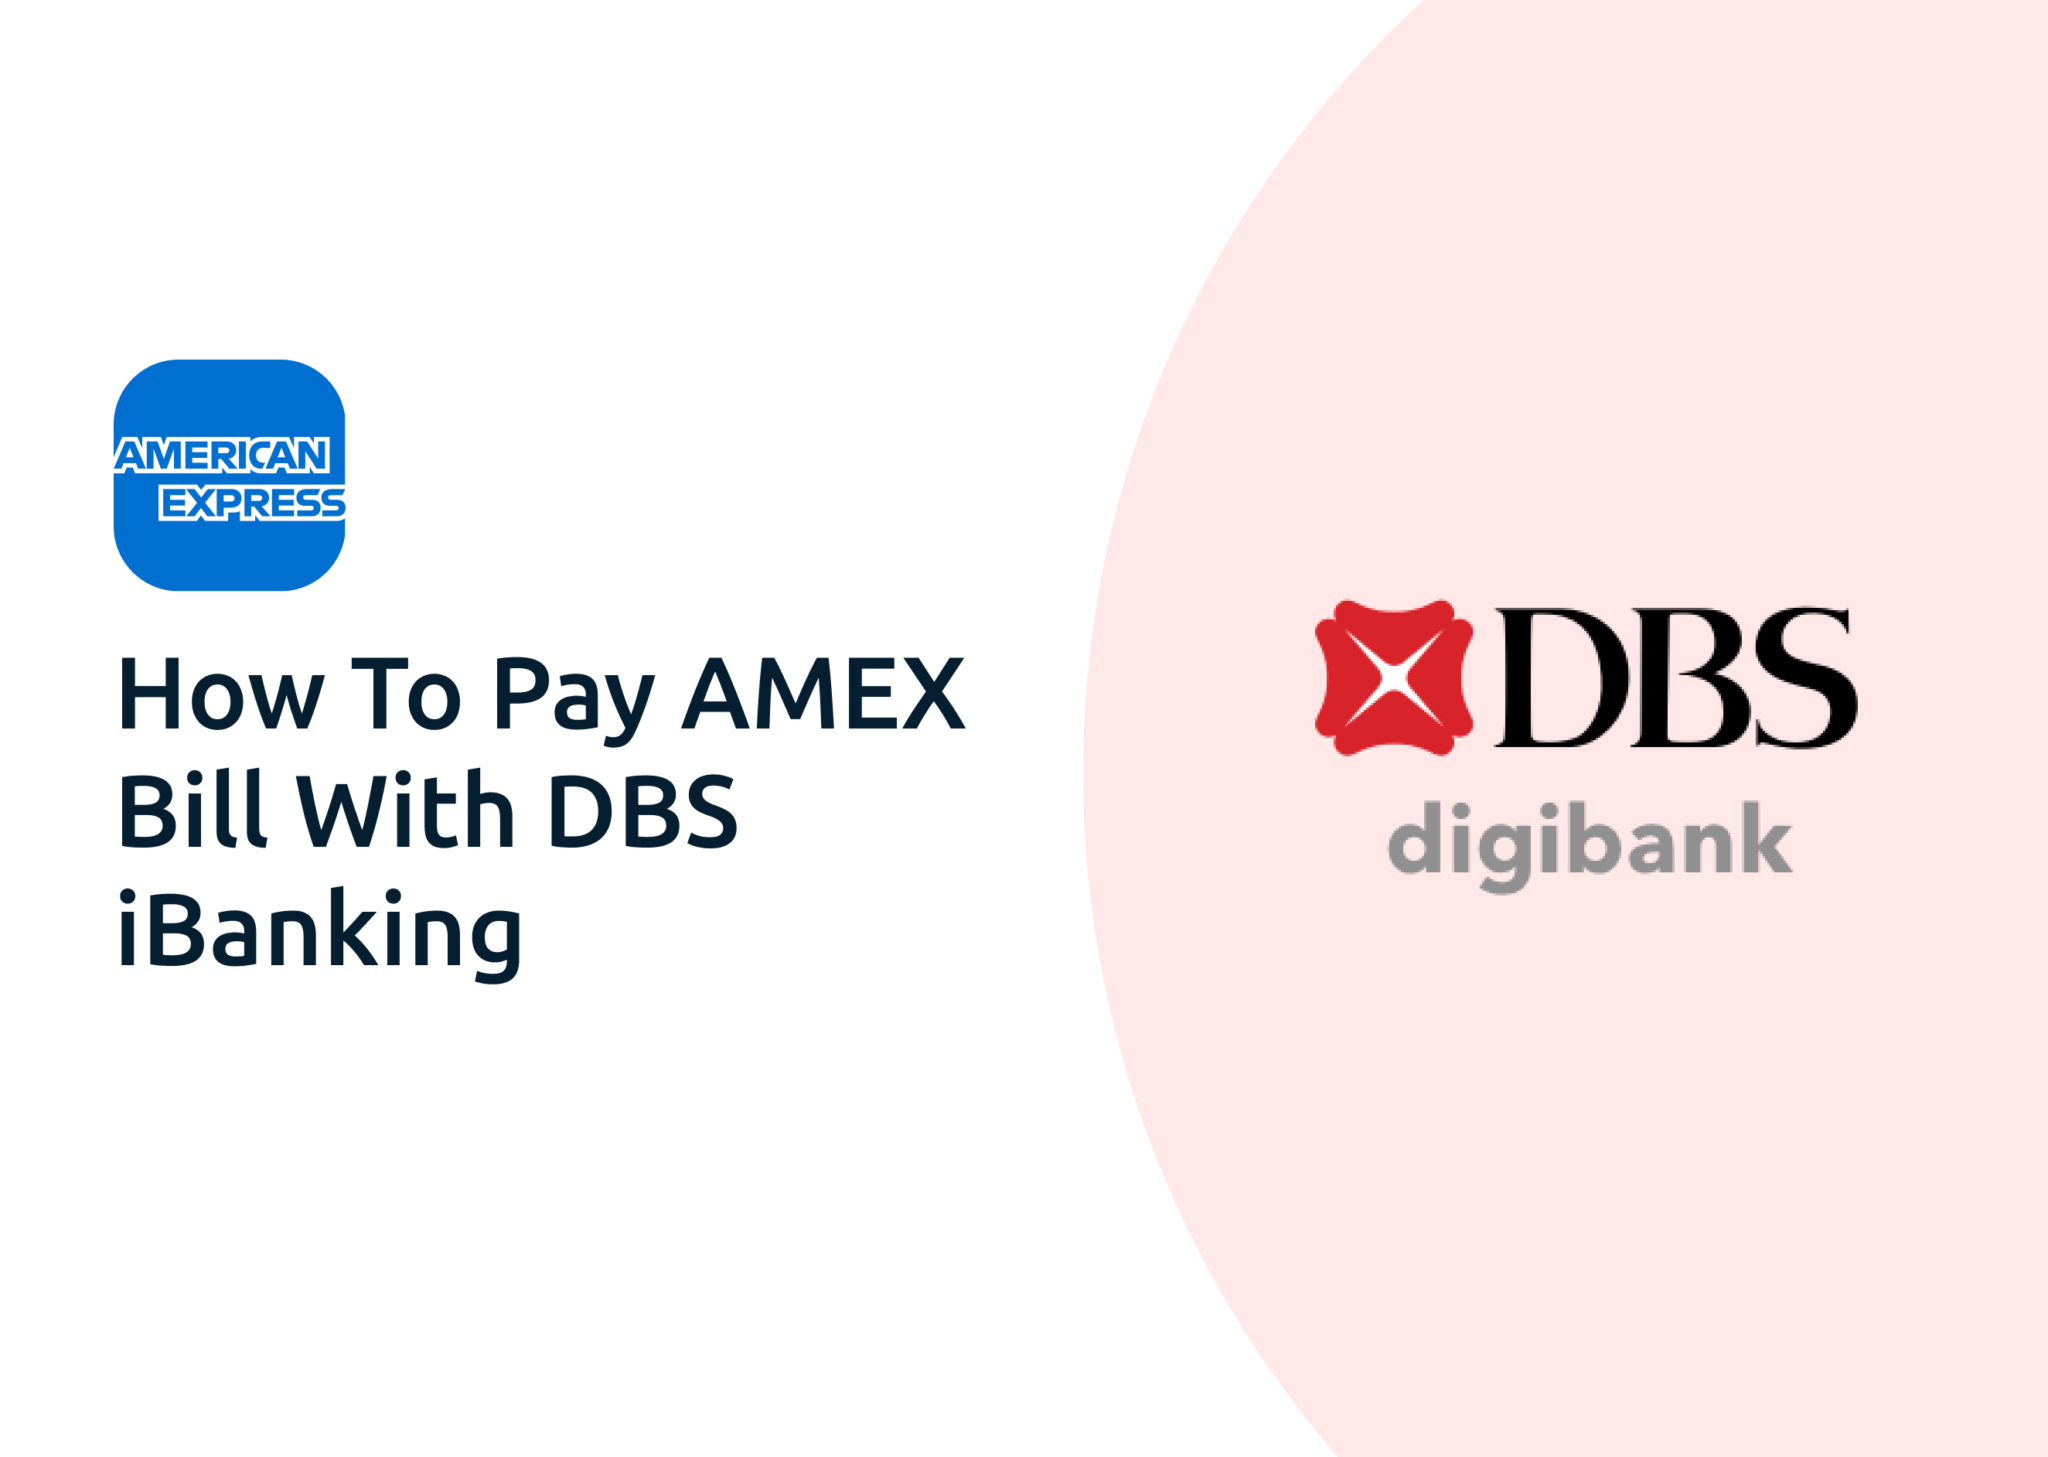 6 Steps To Pay Your AMEX Bill With DBS IBanking Financially